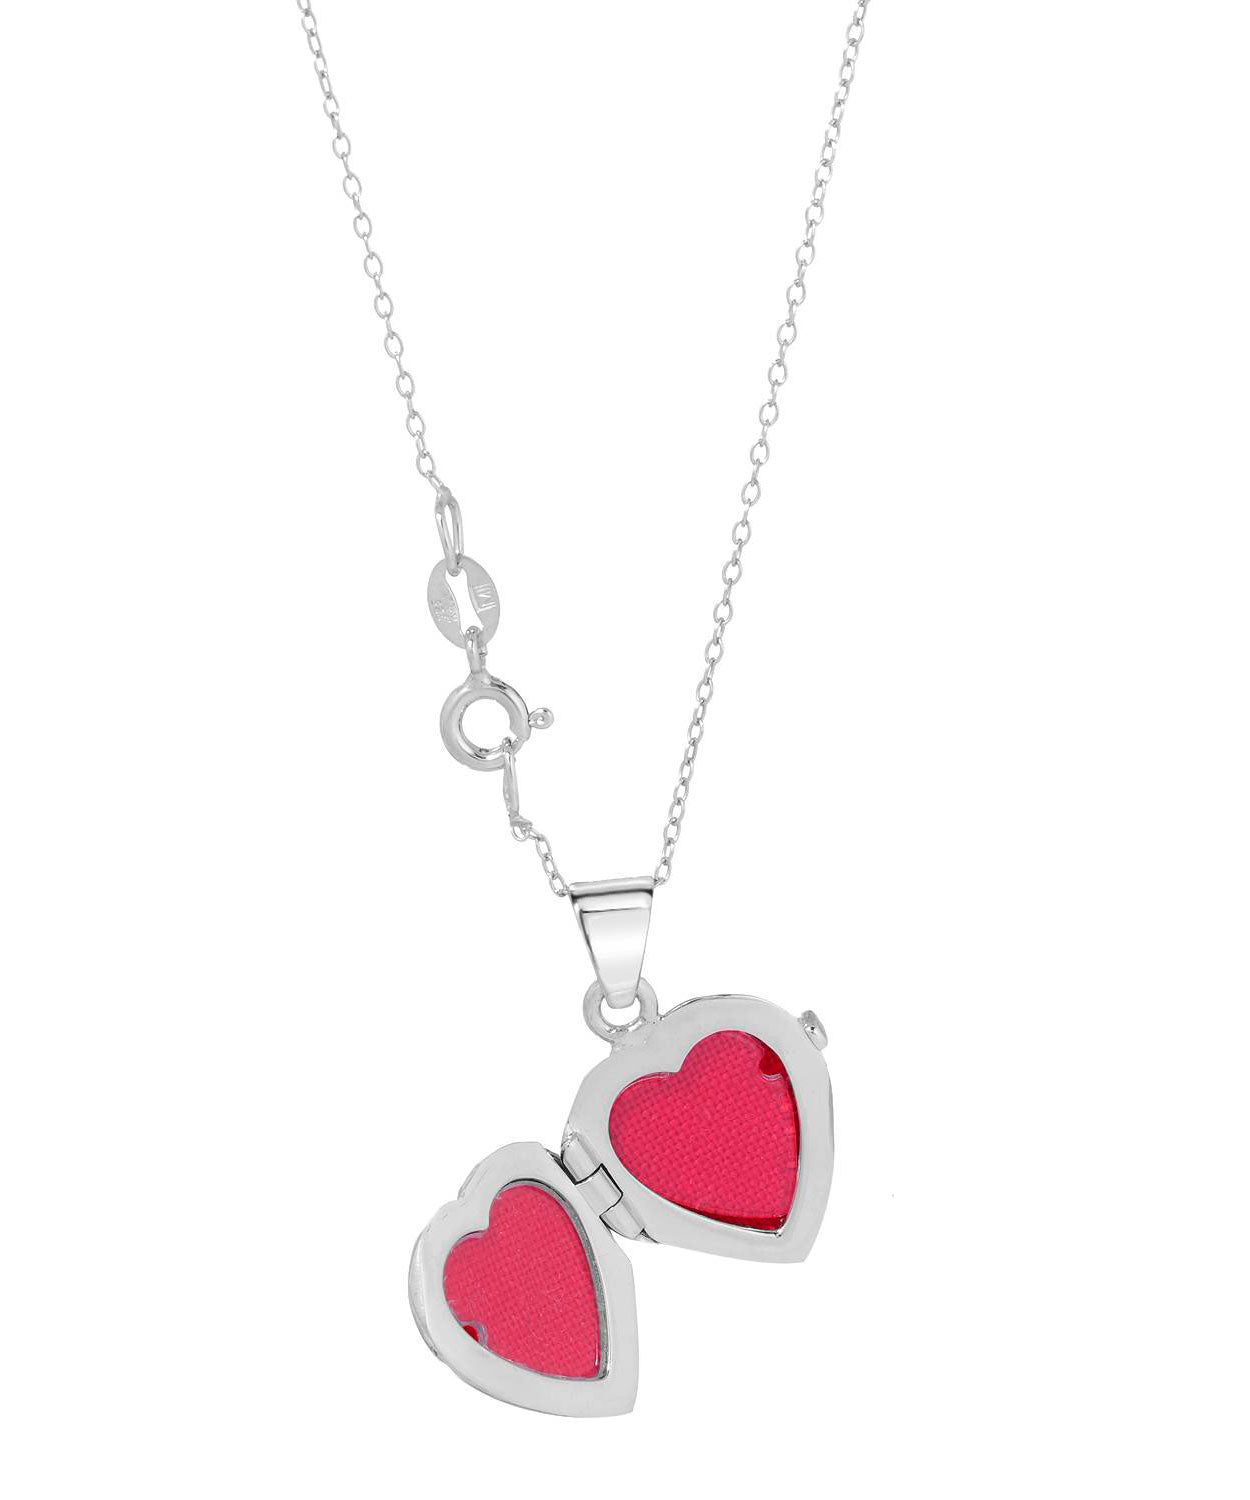 Rhodium Plated 925 Sterling Silver Heart Locket Pendant With Chain - Made in Italy View 2